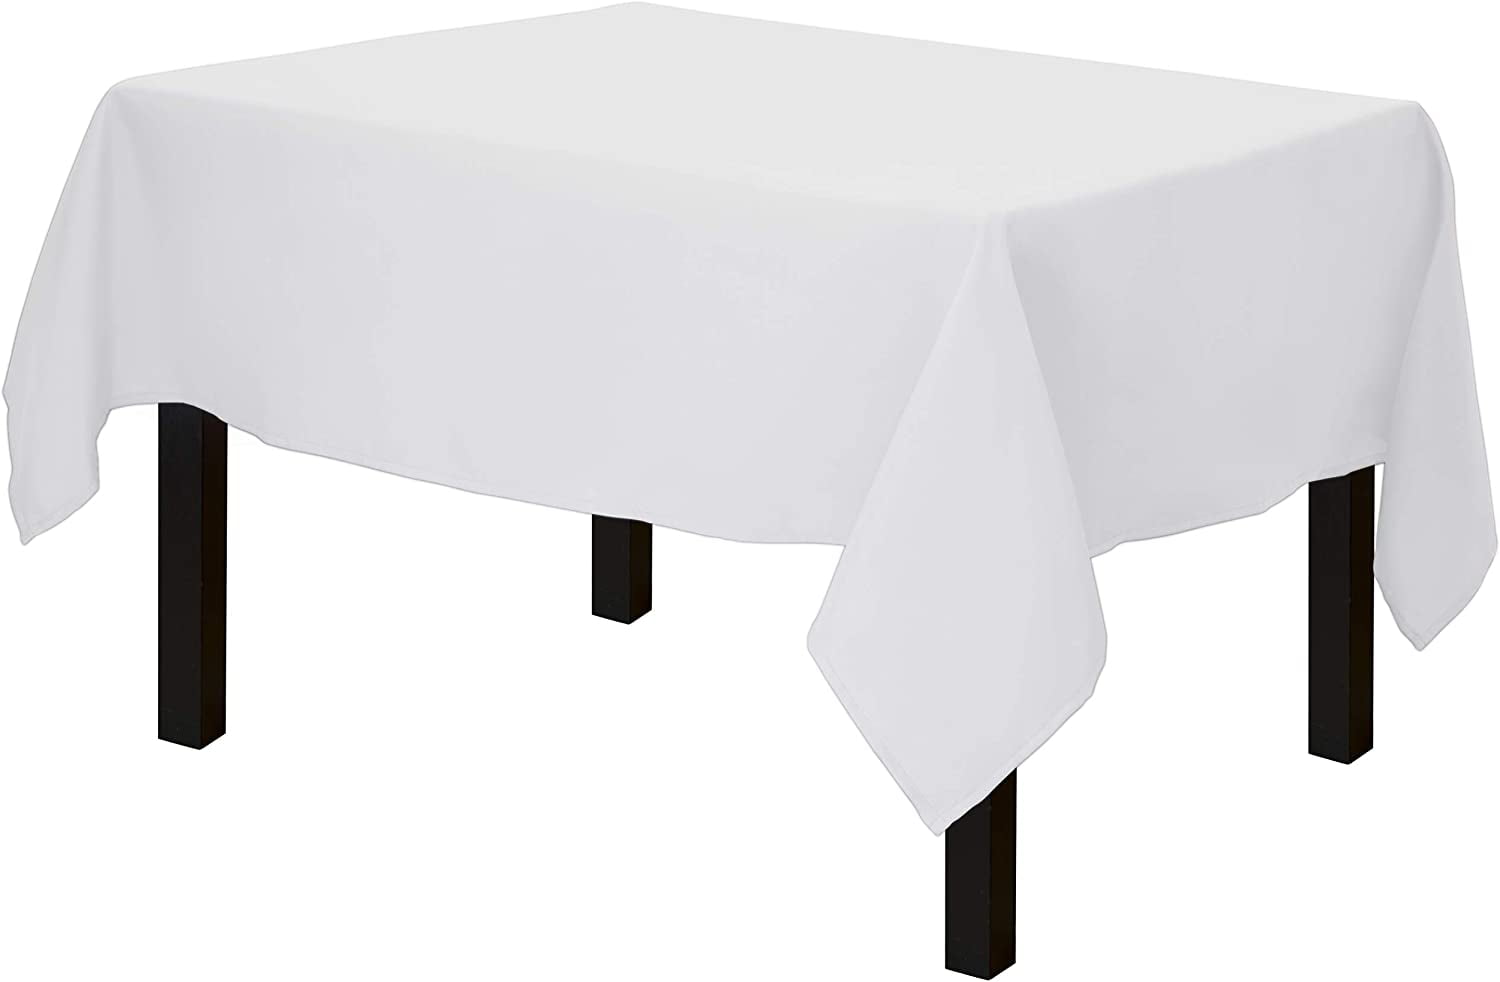 POLYESTER Wedding TABLECLOTH Rectangular Square Round Party Cover White Black UK 